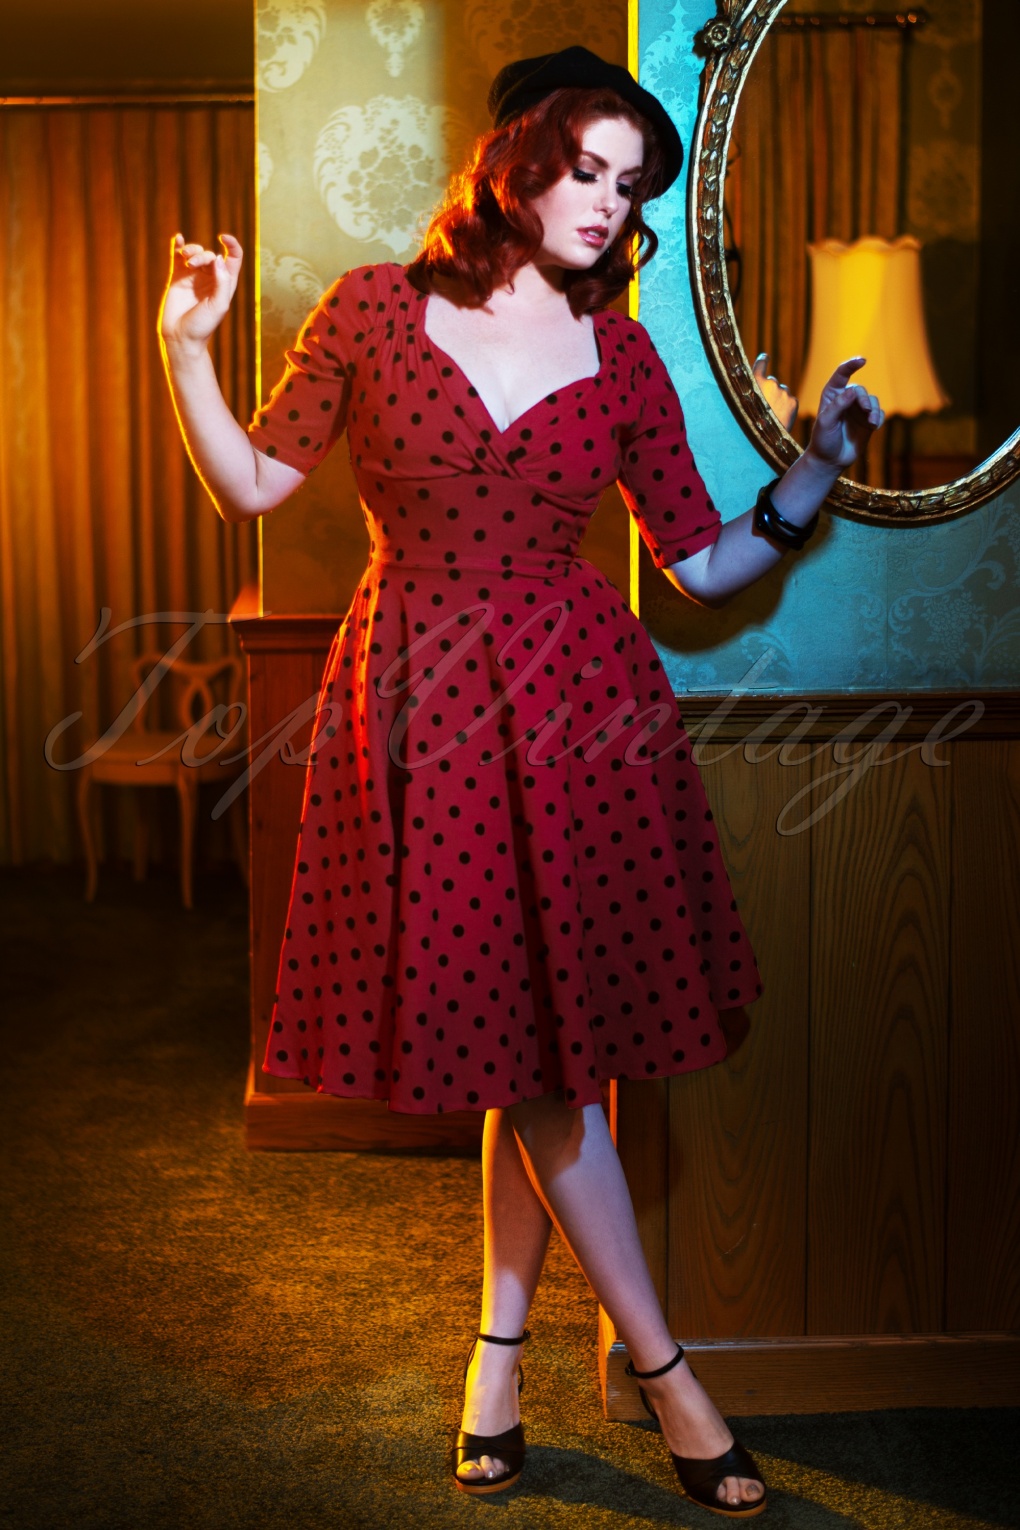 A model wears a vintage a red and black polka dot vintage style dress. She's posed in a dark, warmly lit-room in front of a mirror and walls covered in patterned wallpaper.